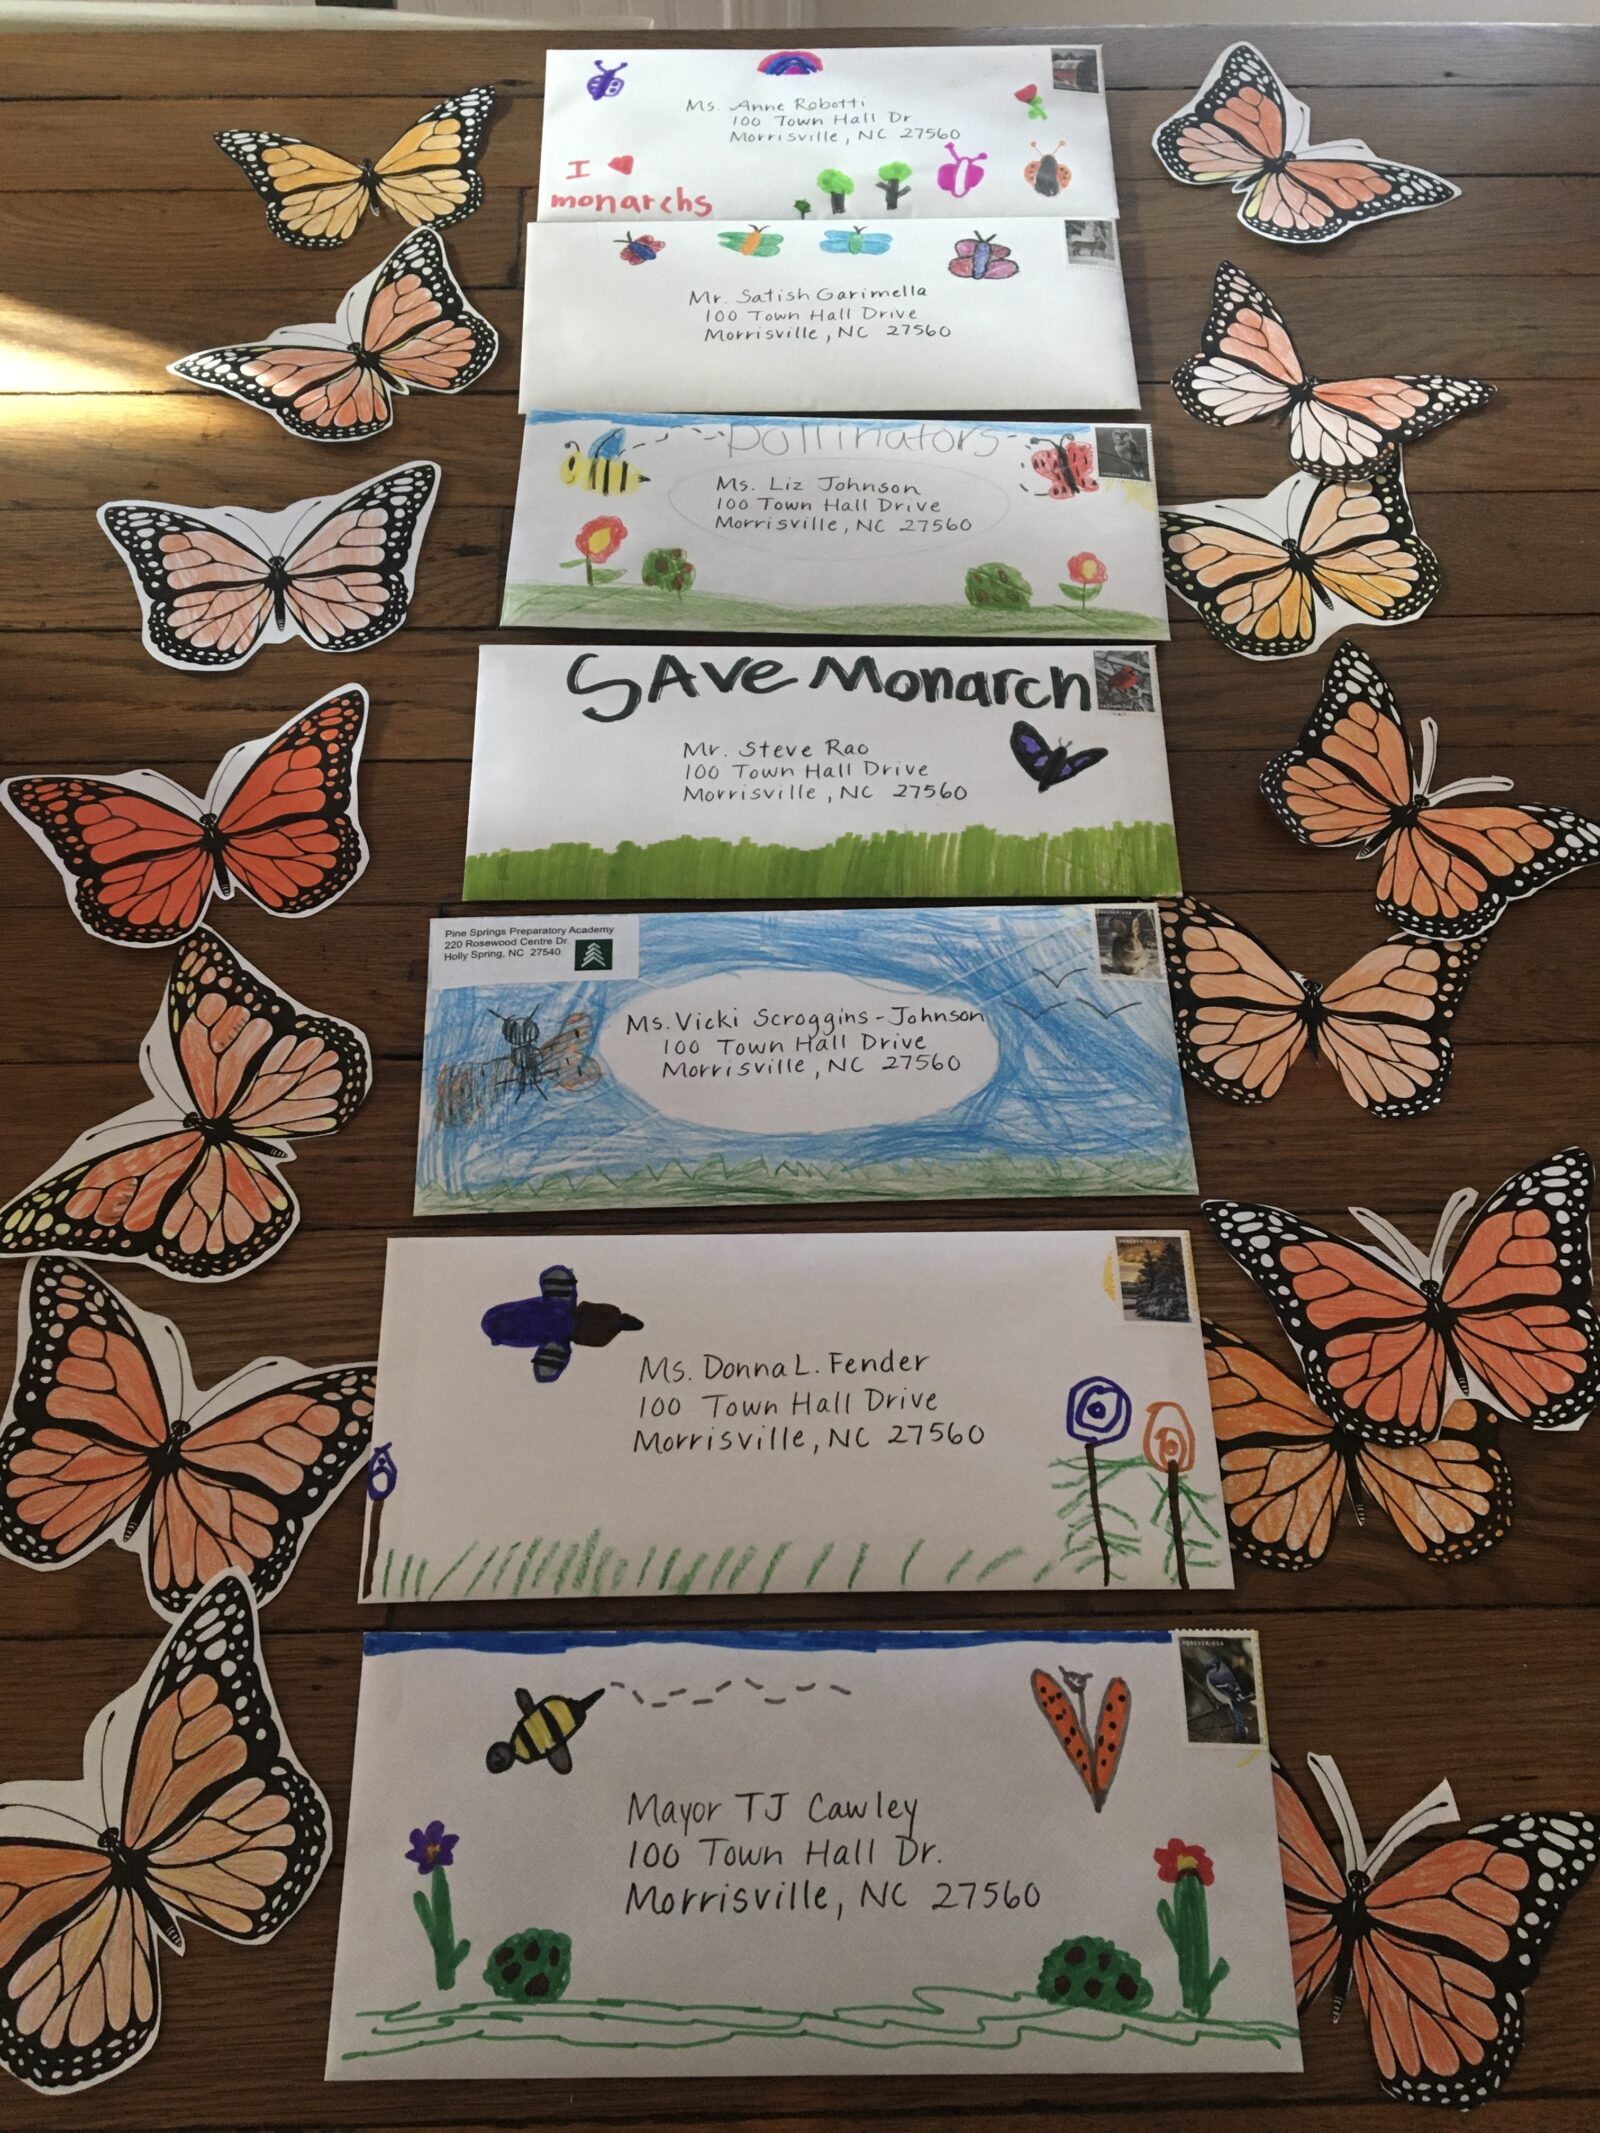 Several handwritten envelopes lay on a table surrounded by monarch butterfly stickers.